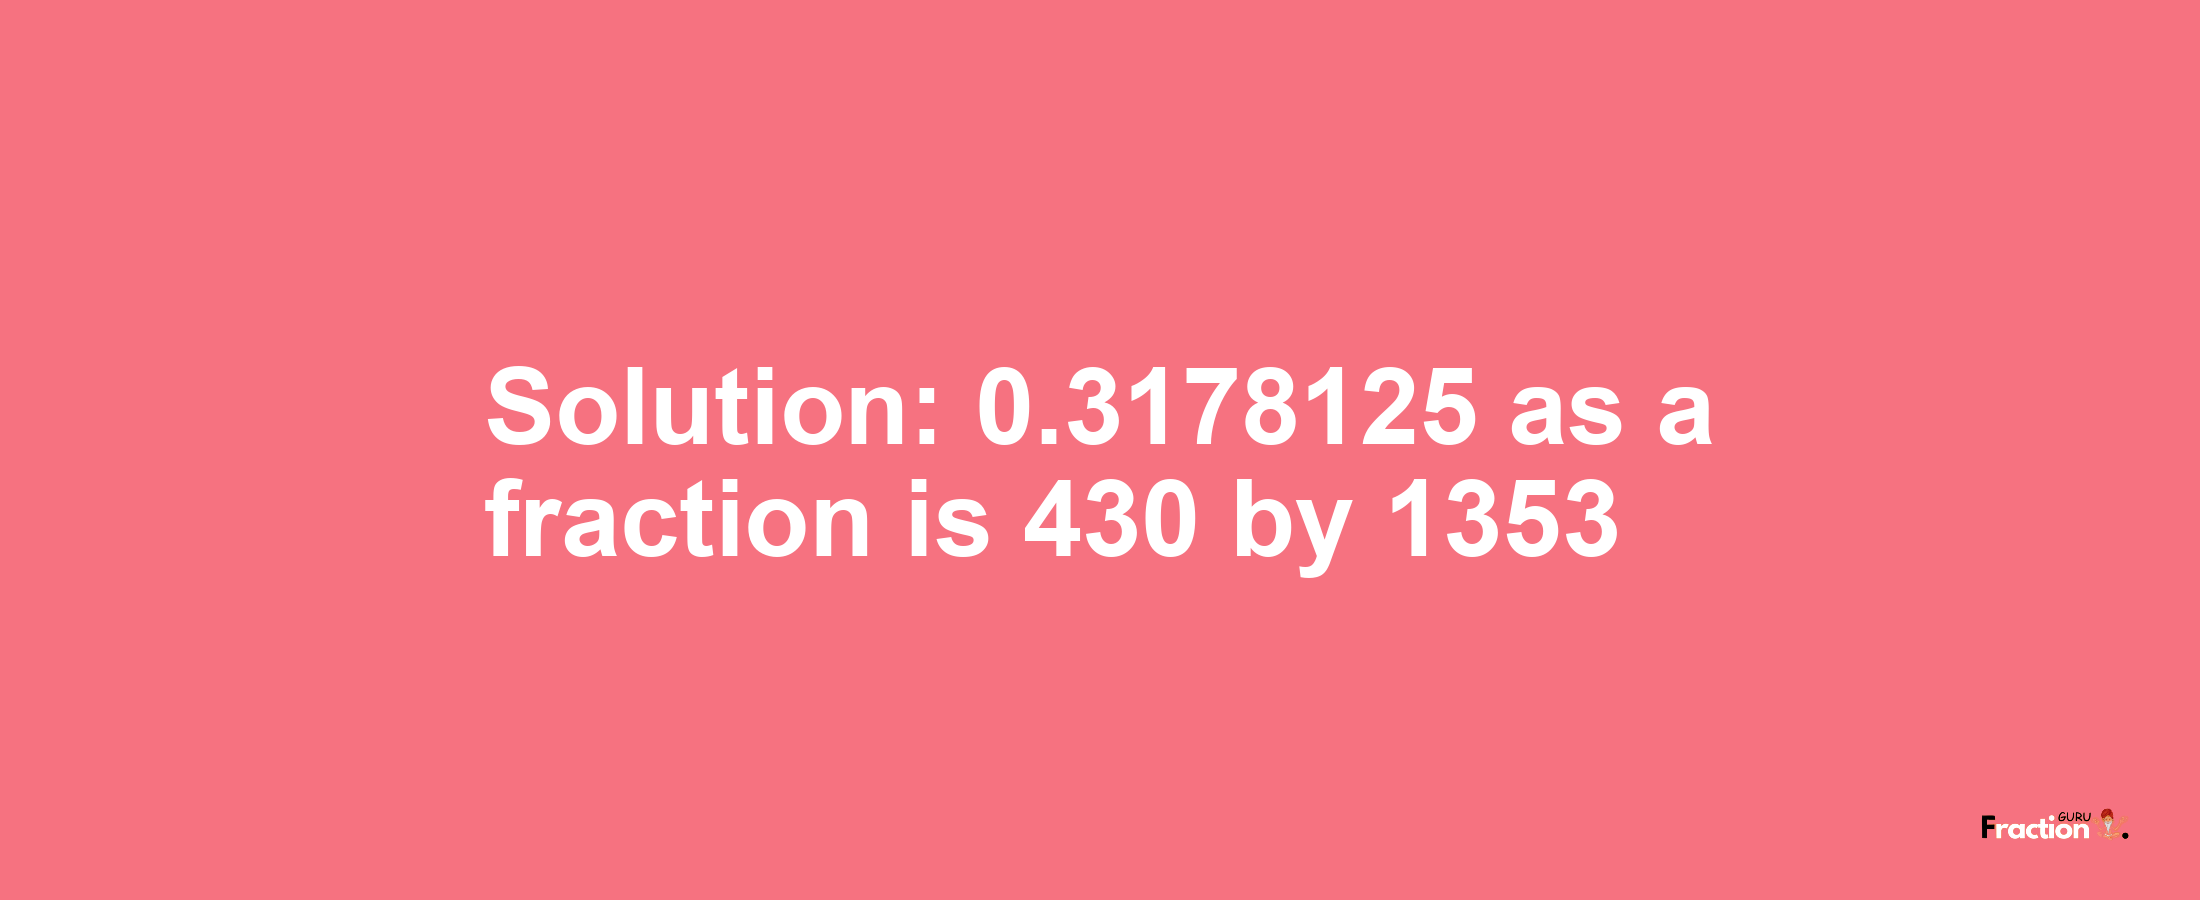 Solution:0.3178125 as a fraction is 430/1353